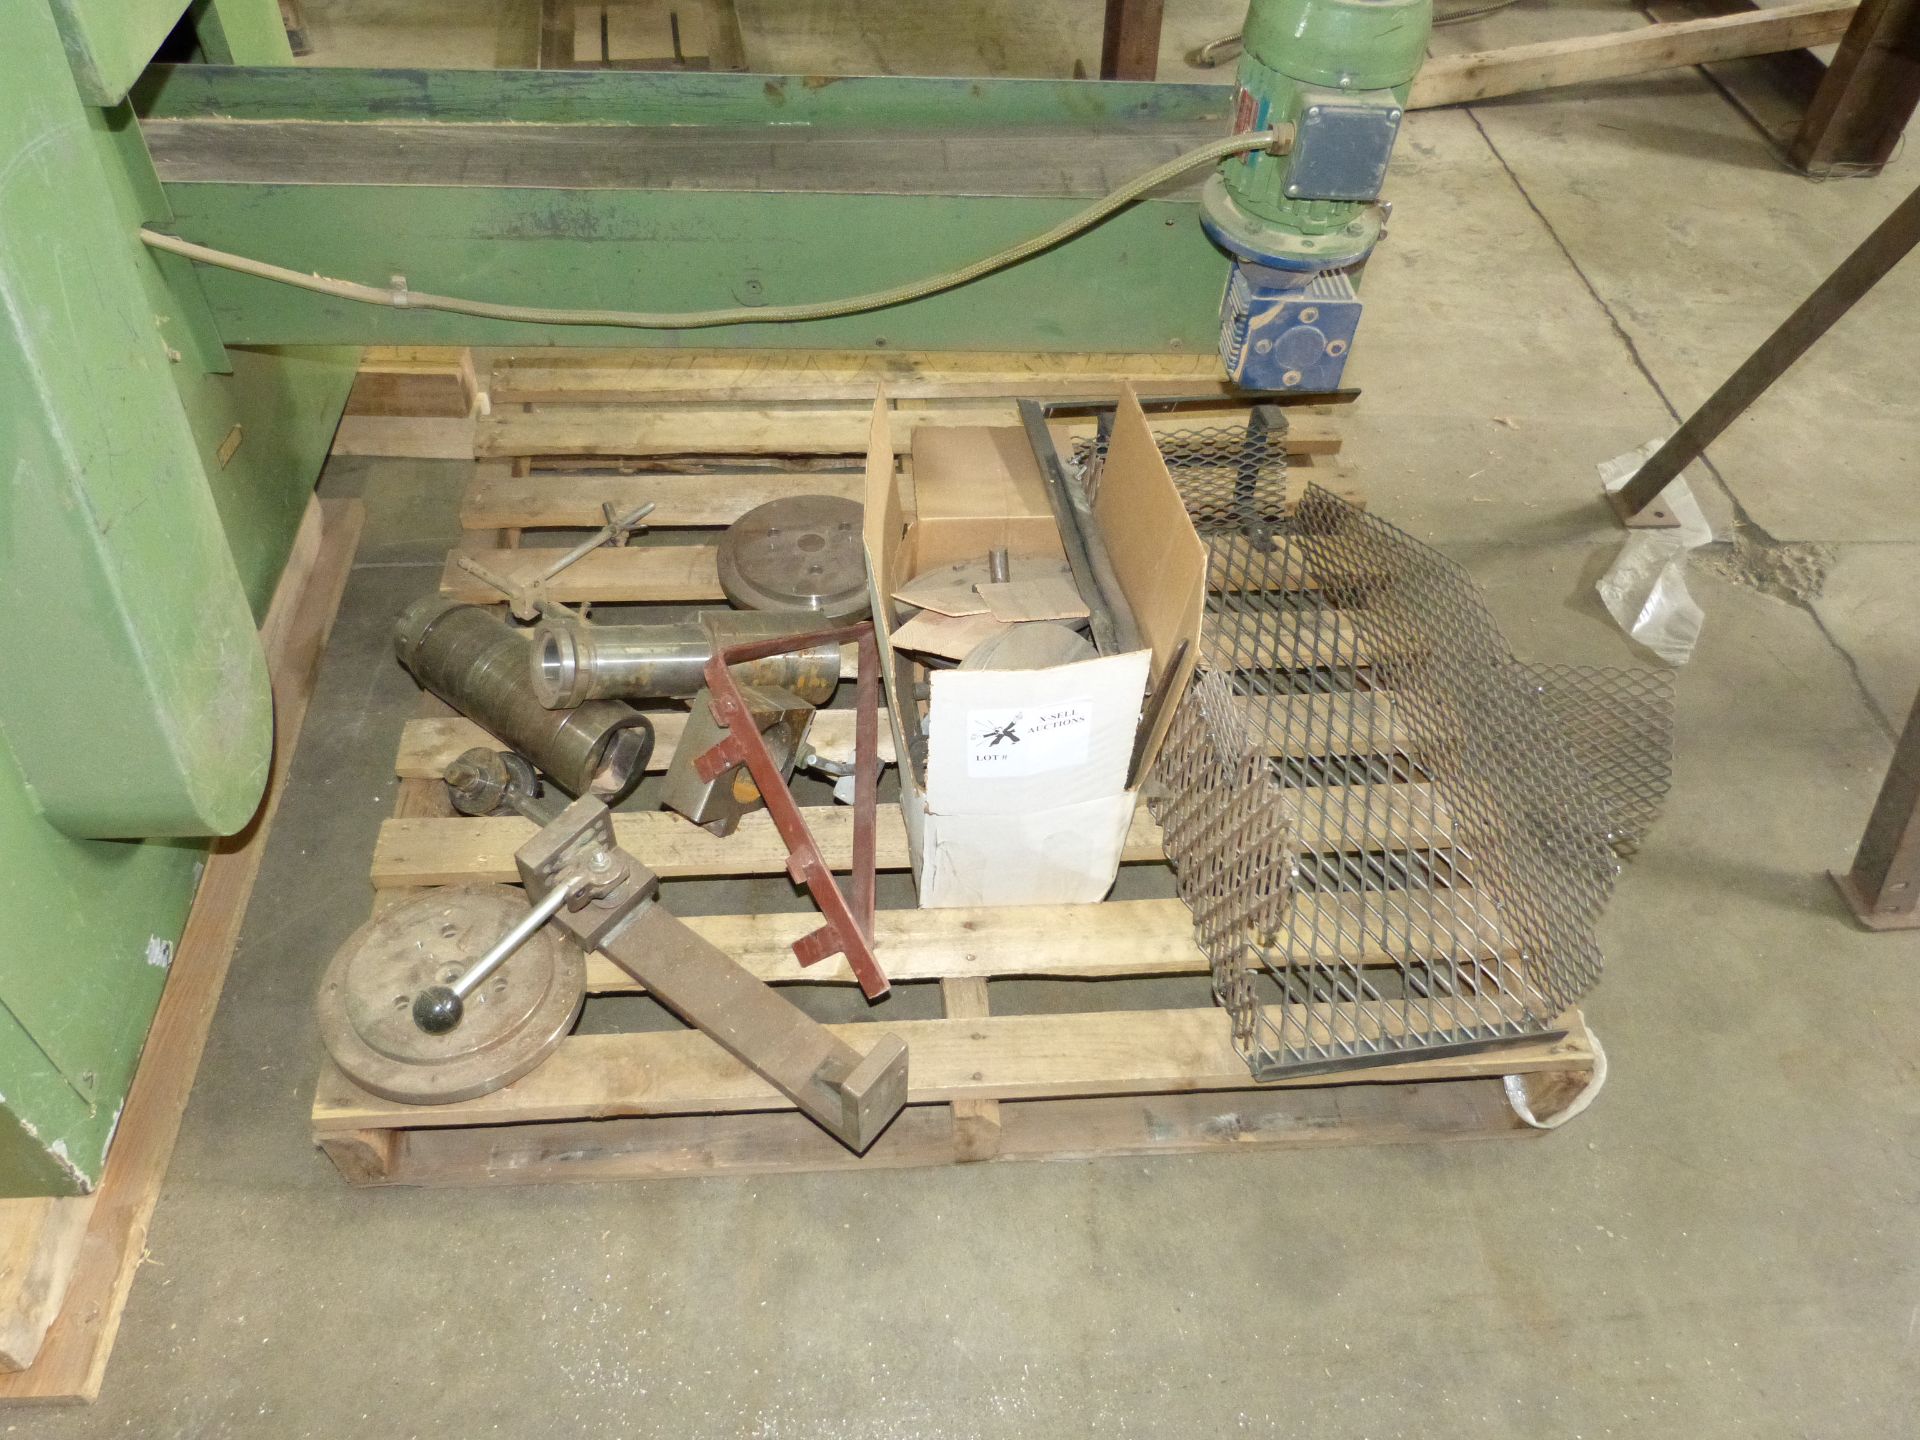 W.A FELL MODEL H.S. ROTARY WOOD LATHE S/N 21/80 - Image 7 of 8